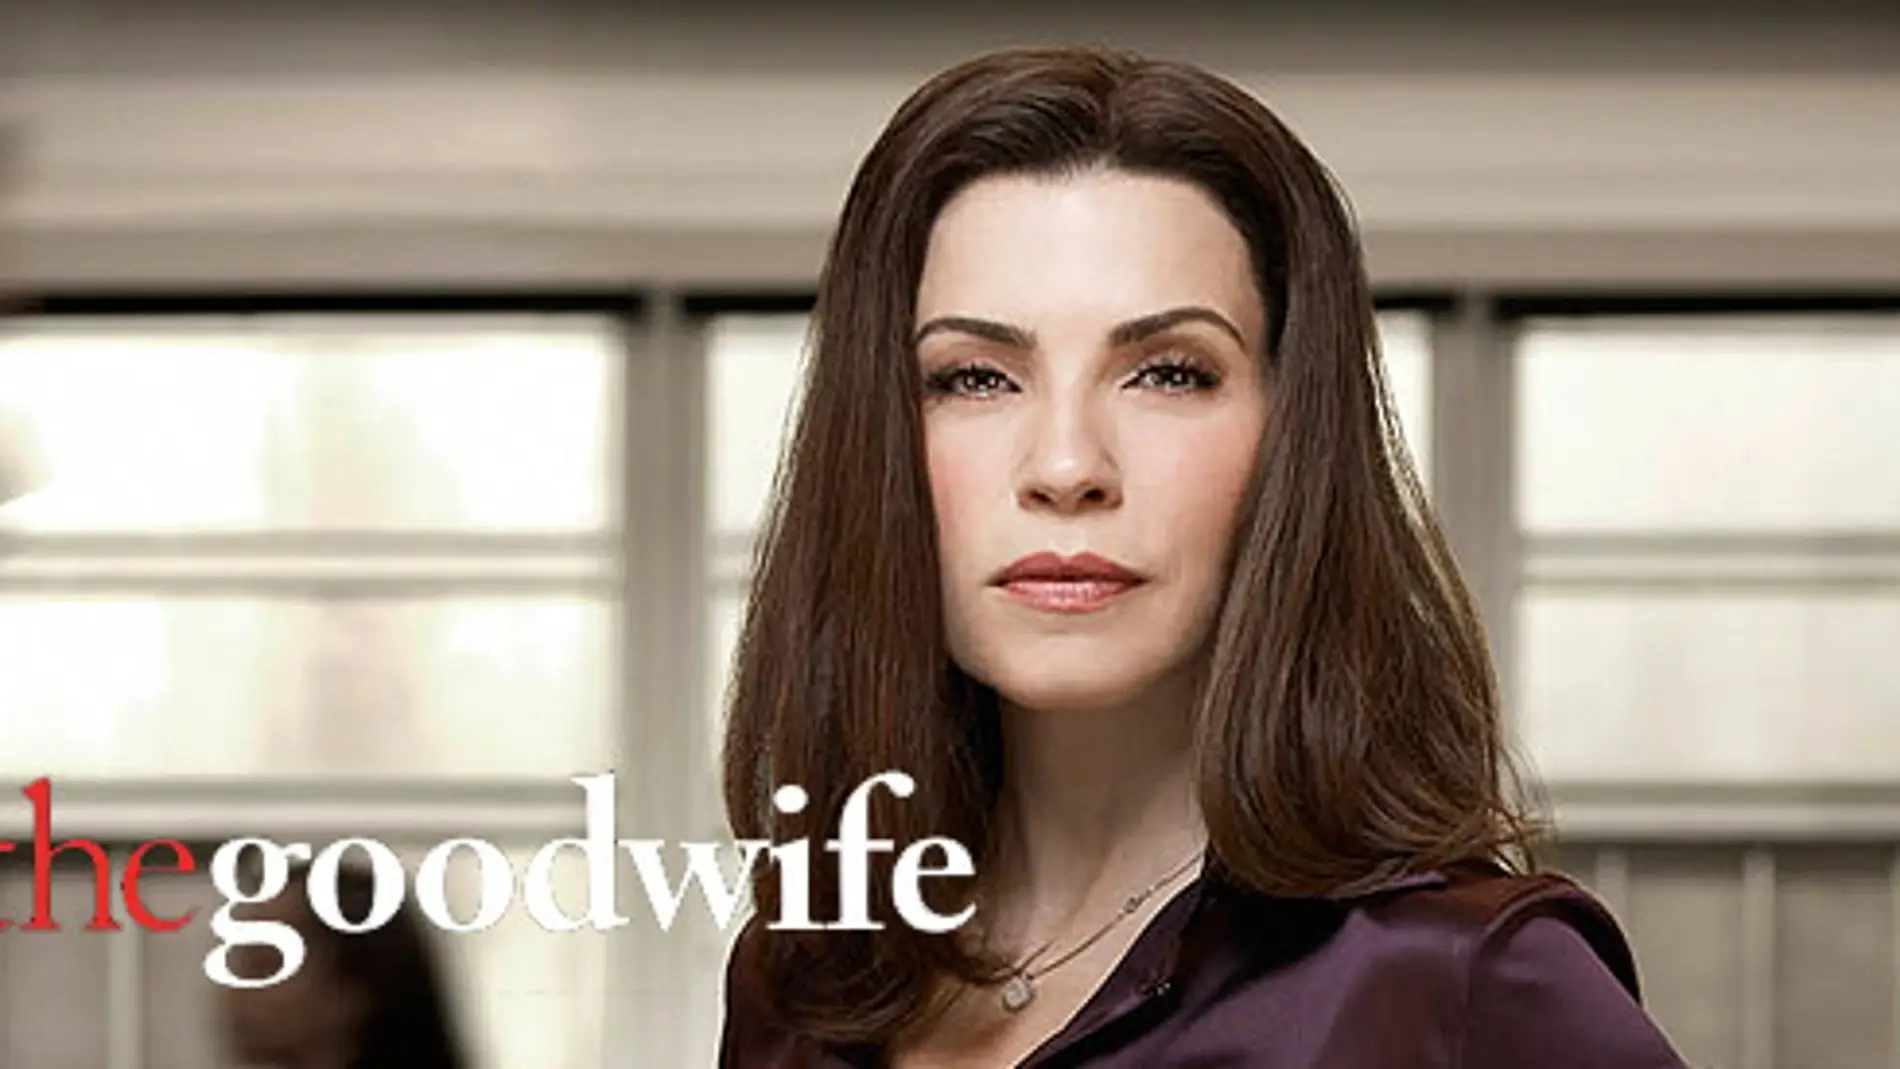 super_The good wife